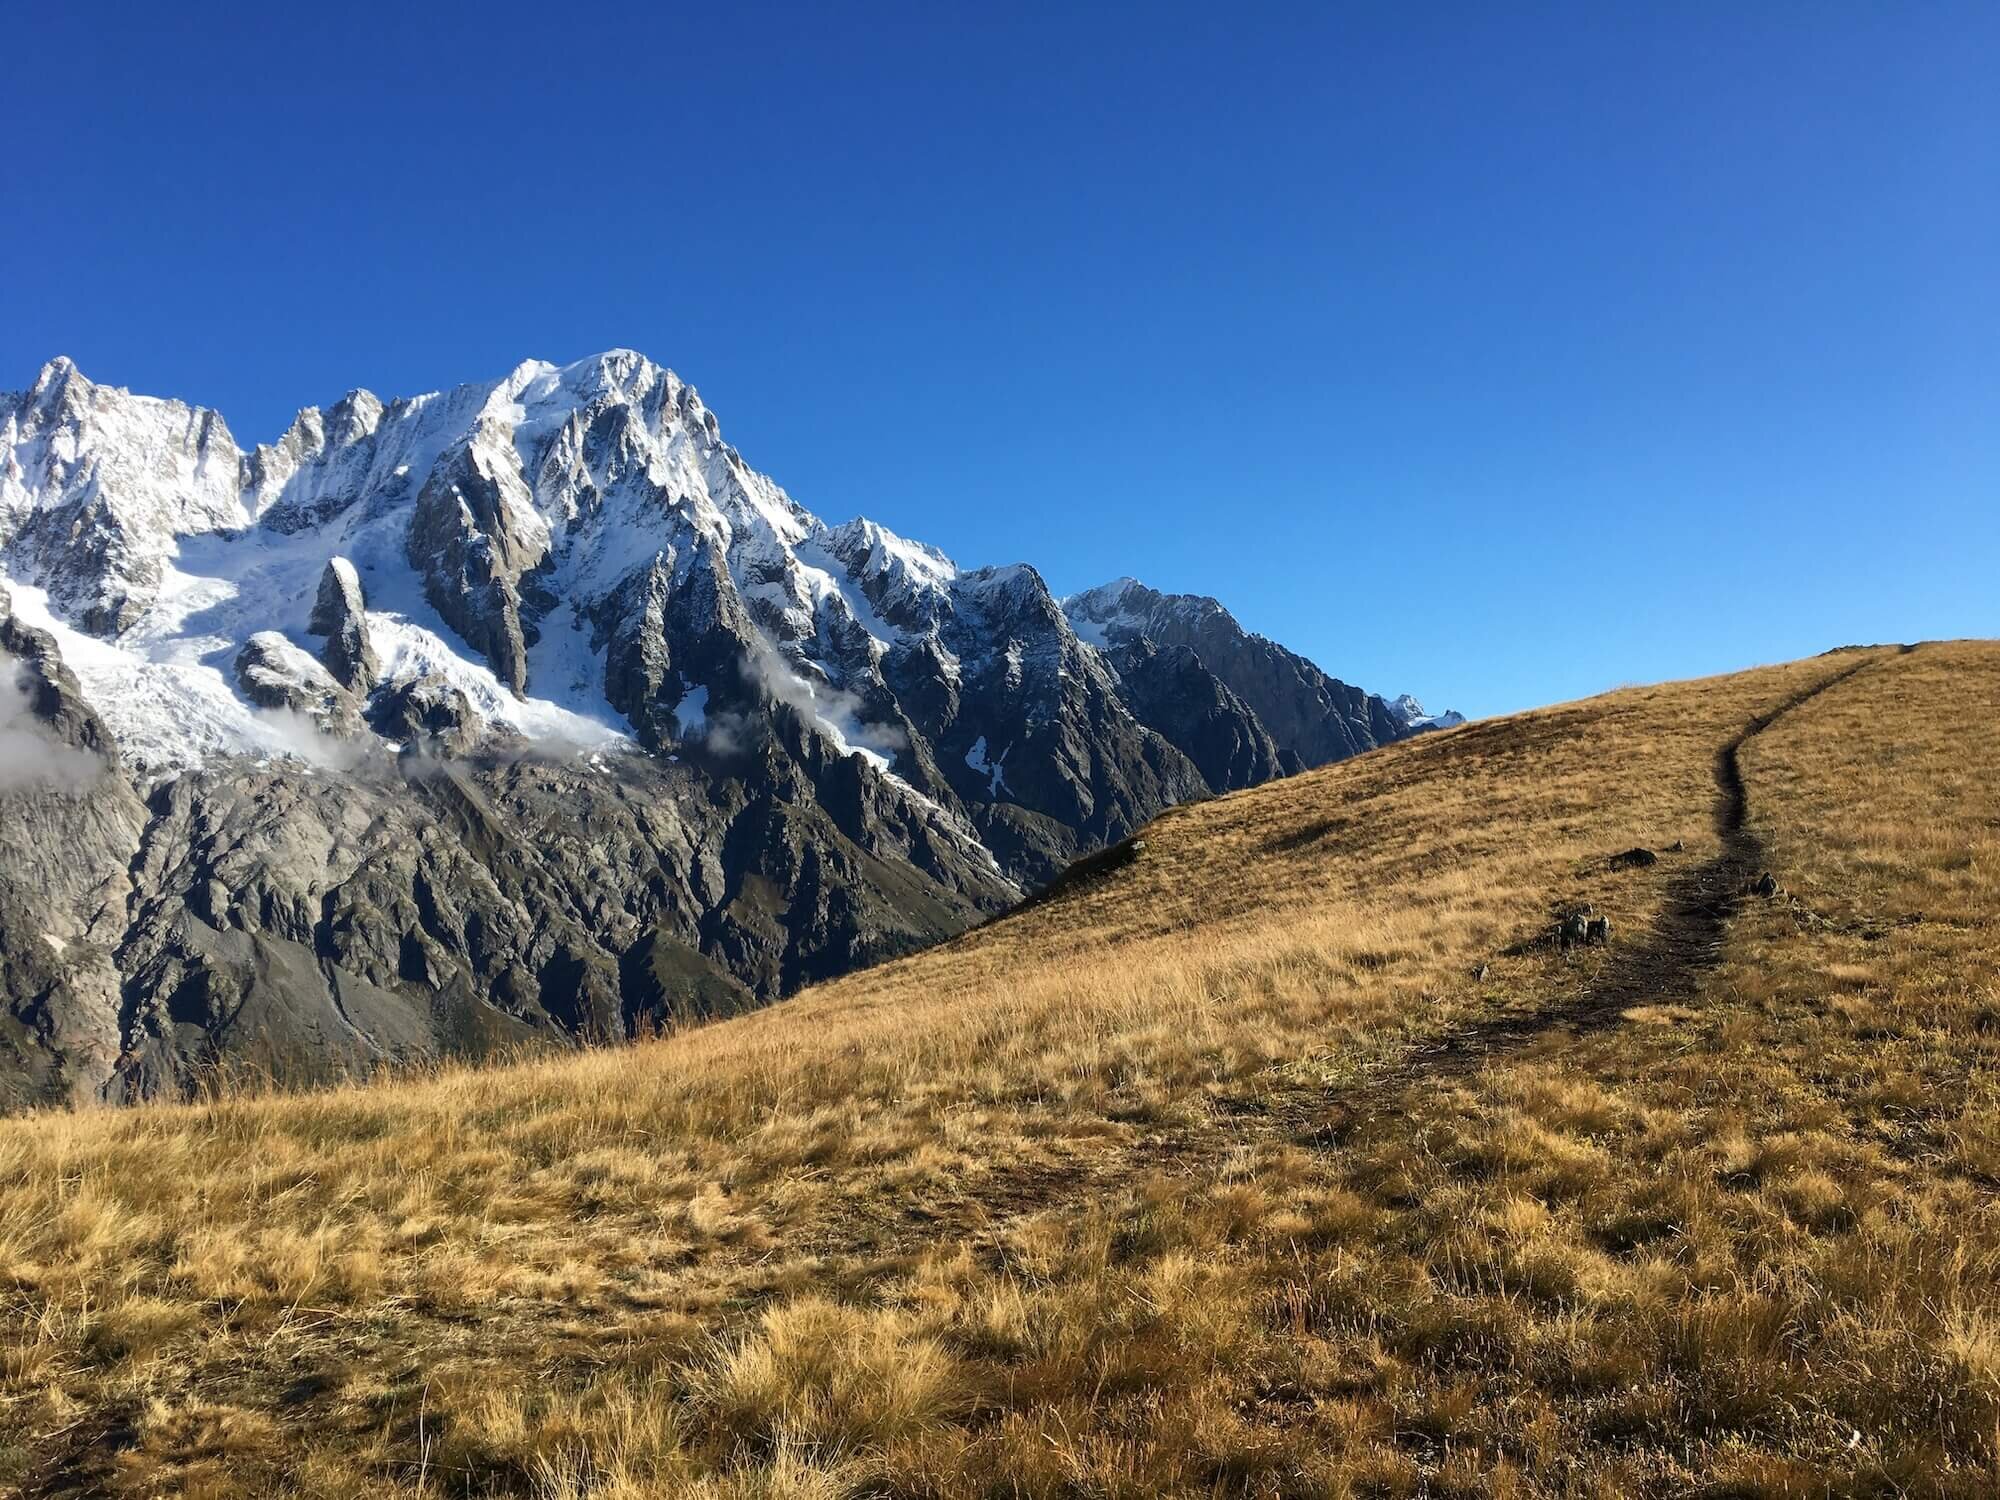 Ridgeline trail with uninterrupted views of Mont Blanc massif